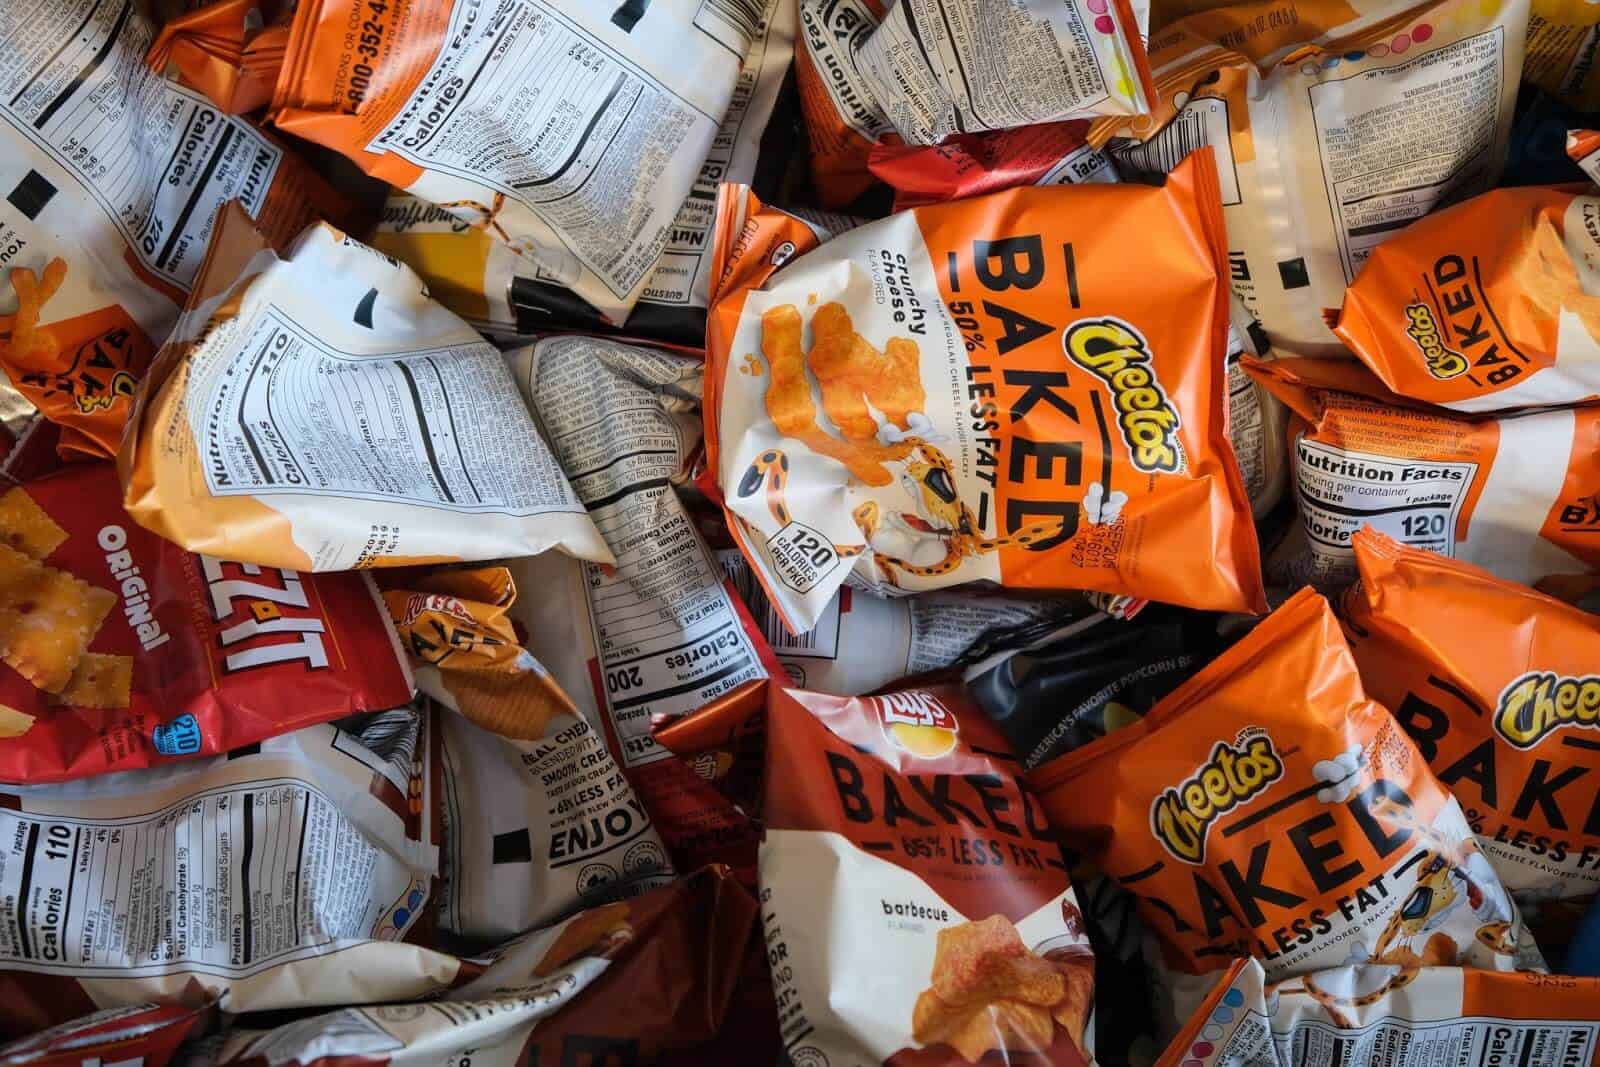 Pile of Chips and Snacks in their bags